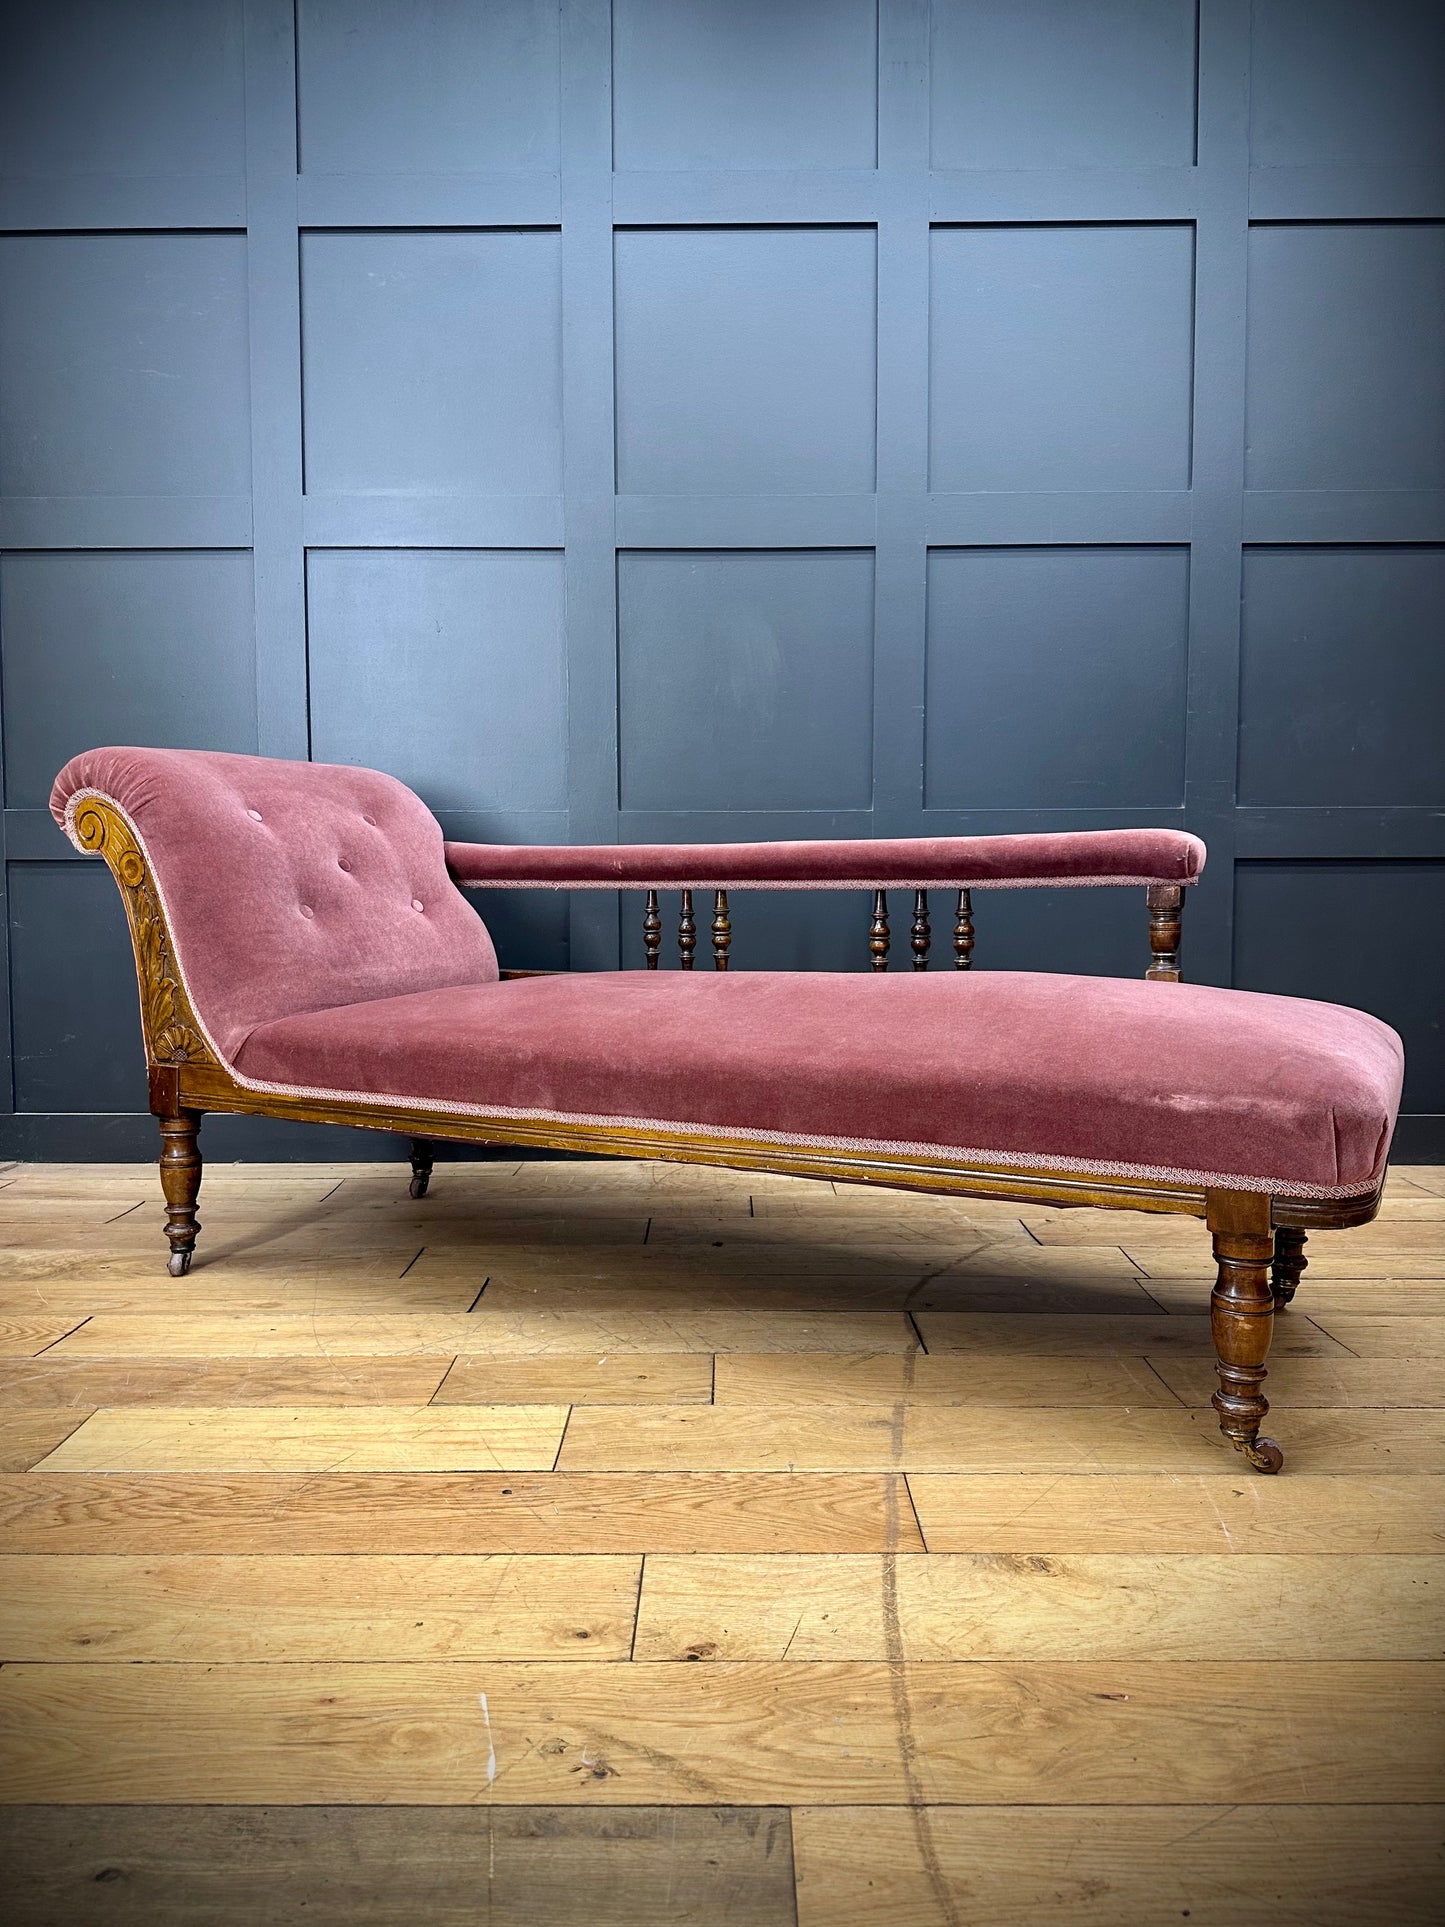 Antique Chaise Longue  / Antique Day Bed / Walnut Frame Sofa /Victorian Chaise